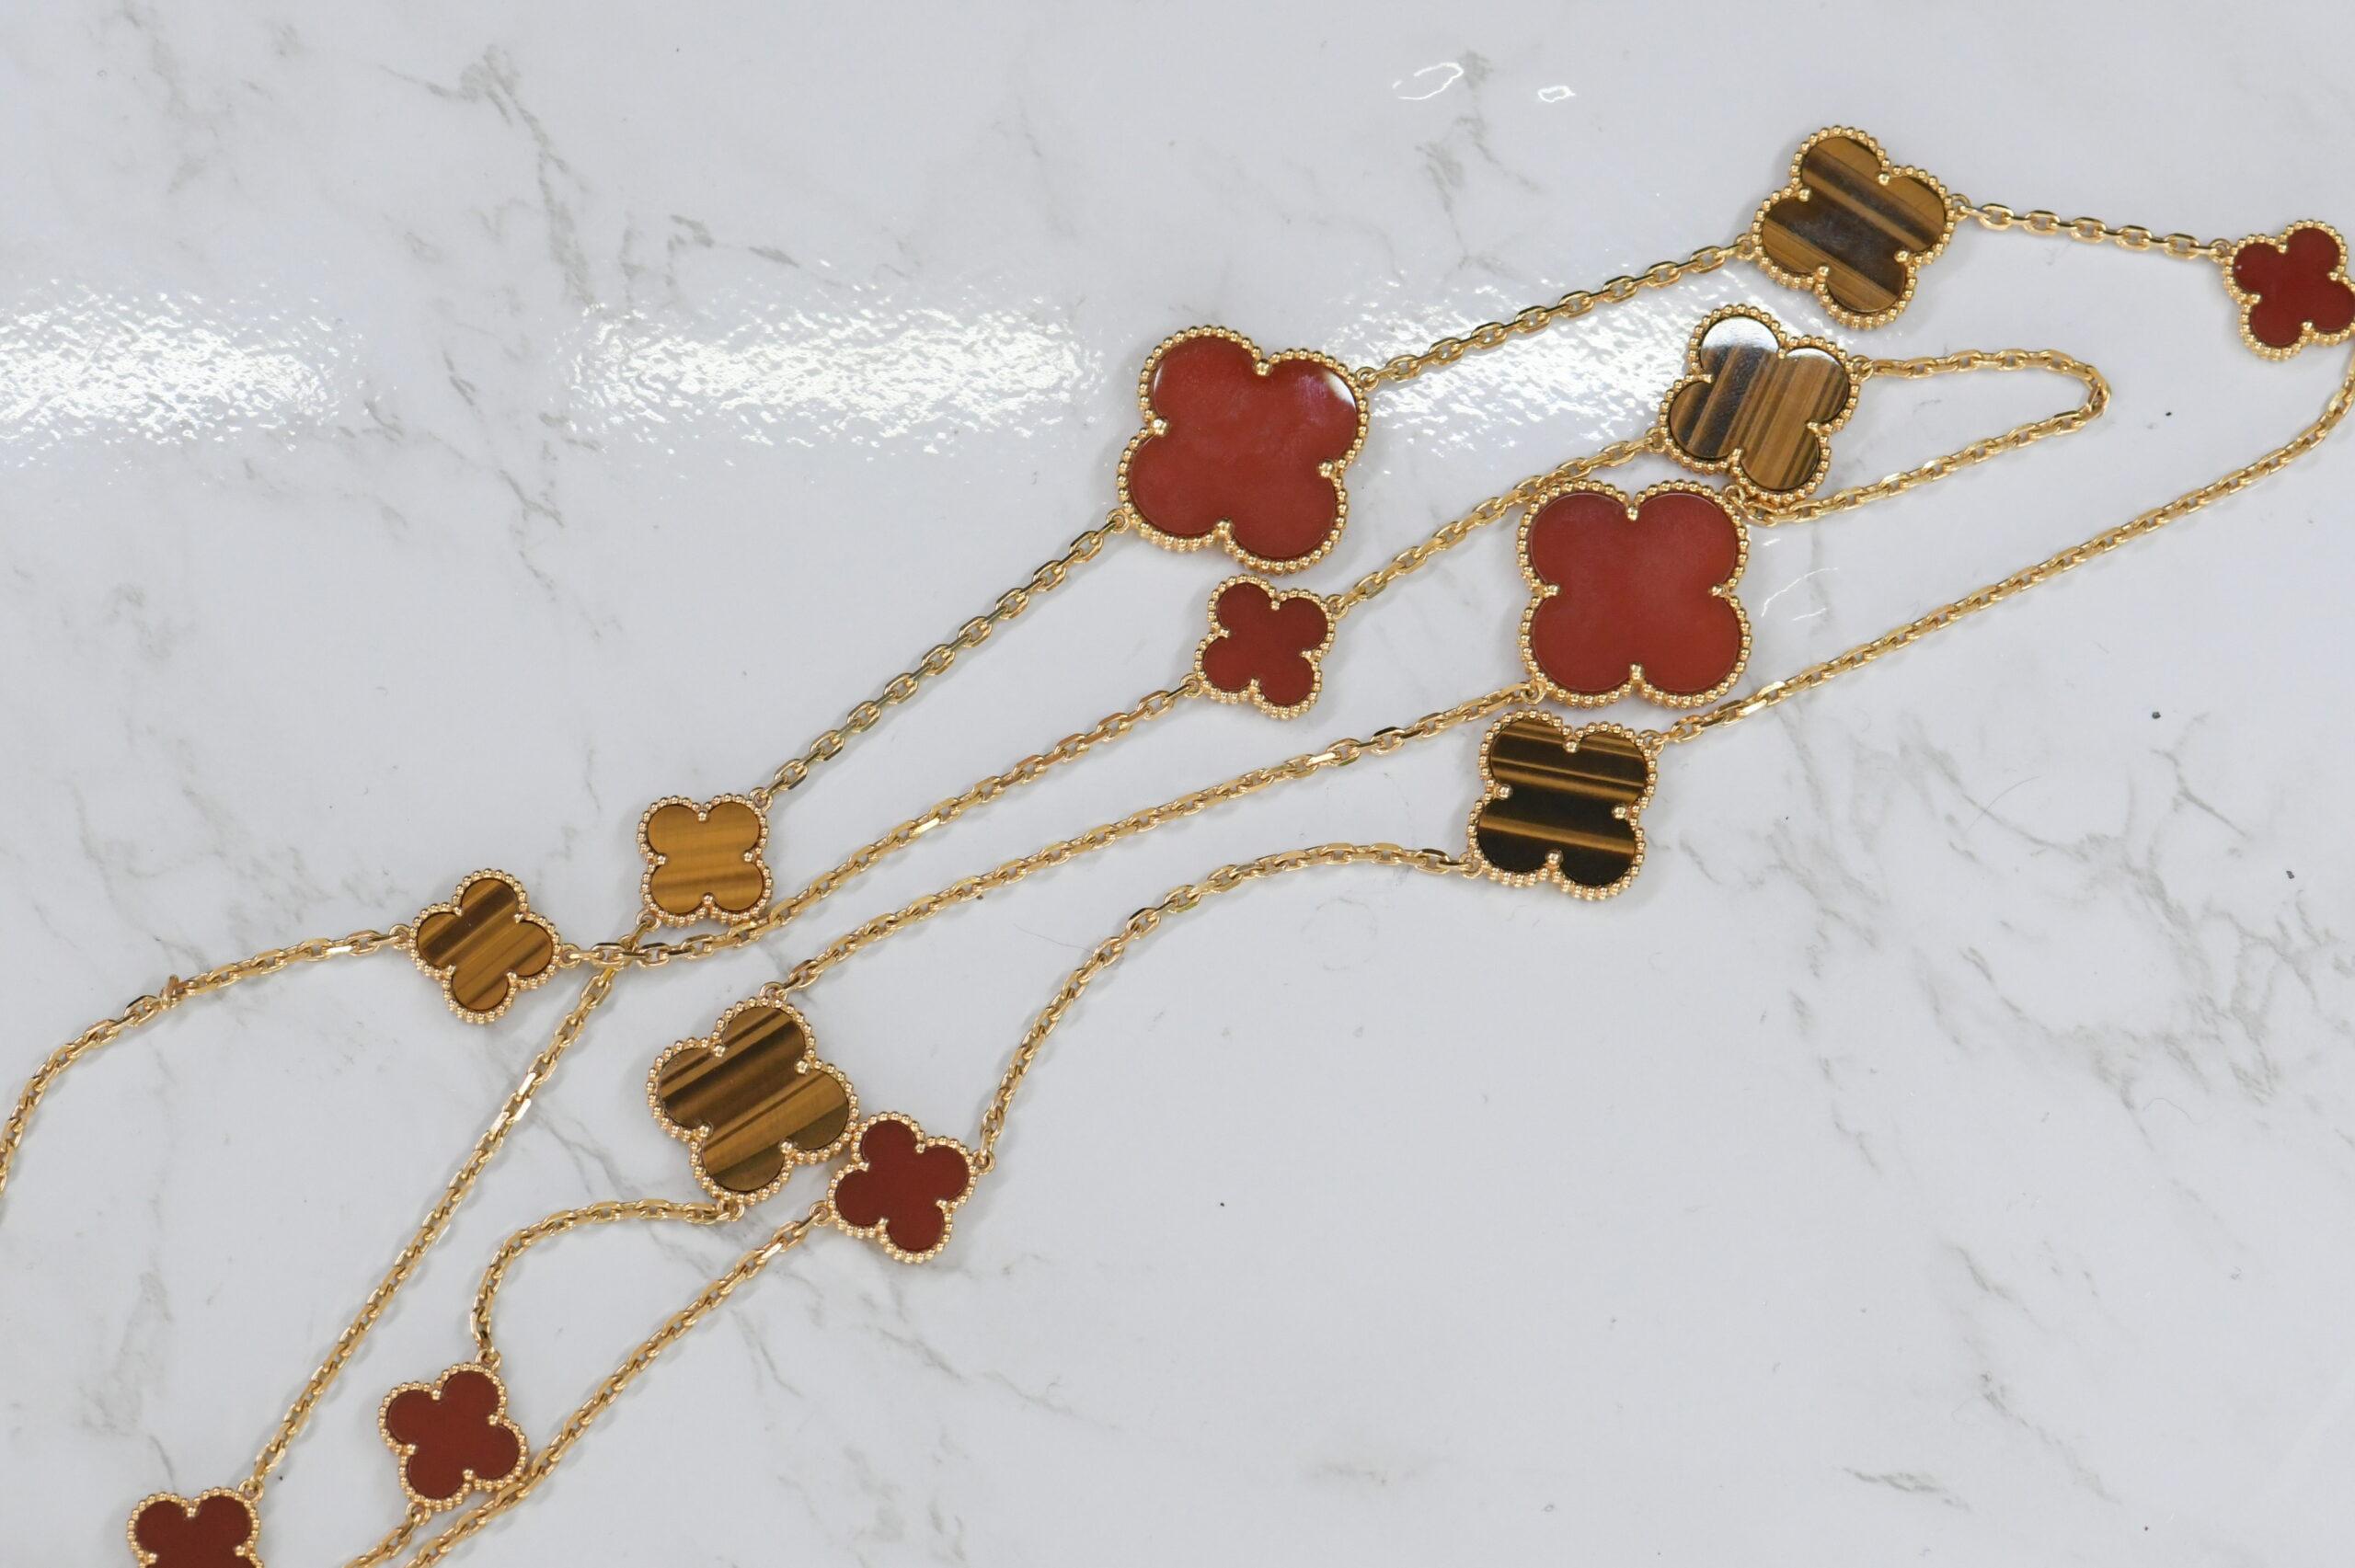 This Van Cleef & Arpels 18K gold necklace features 16 variously sized carnelian and tiger's eye quatrefoil motifs on a fine link chain. Necklace length 48 inches. French assay and workshop marks. Signed VCA, necklace numbered BL273863.
